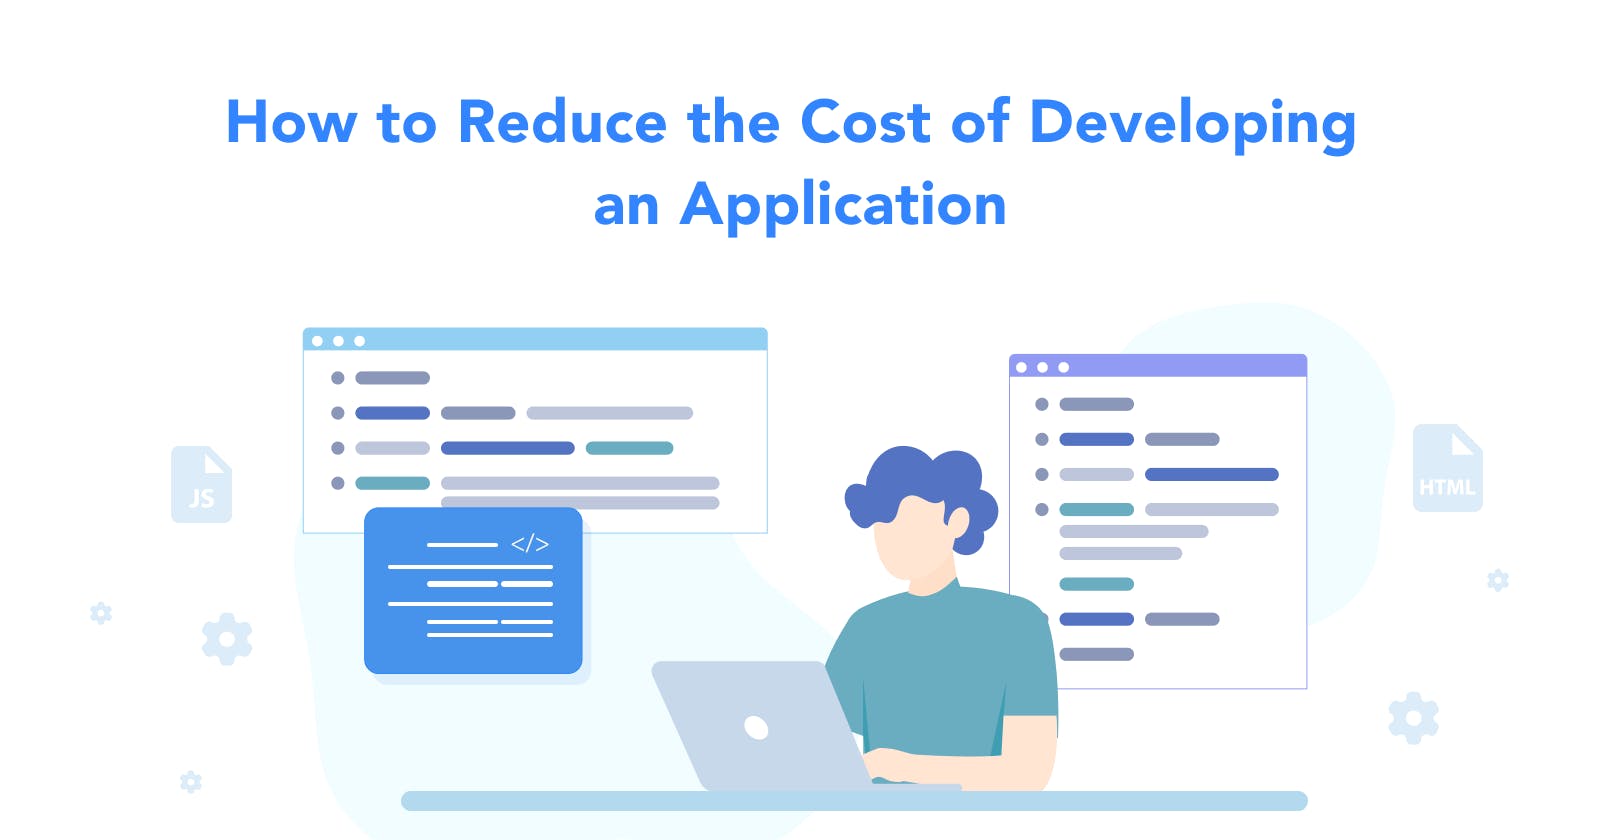 How to Reduce the Cost of Developing an Application